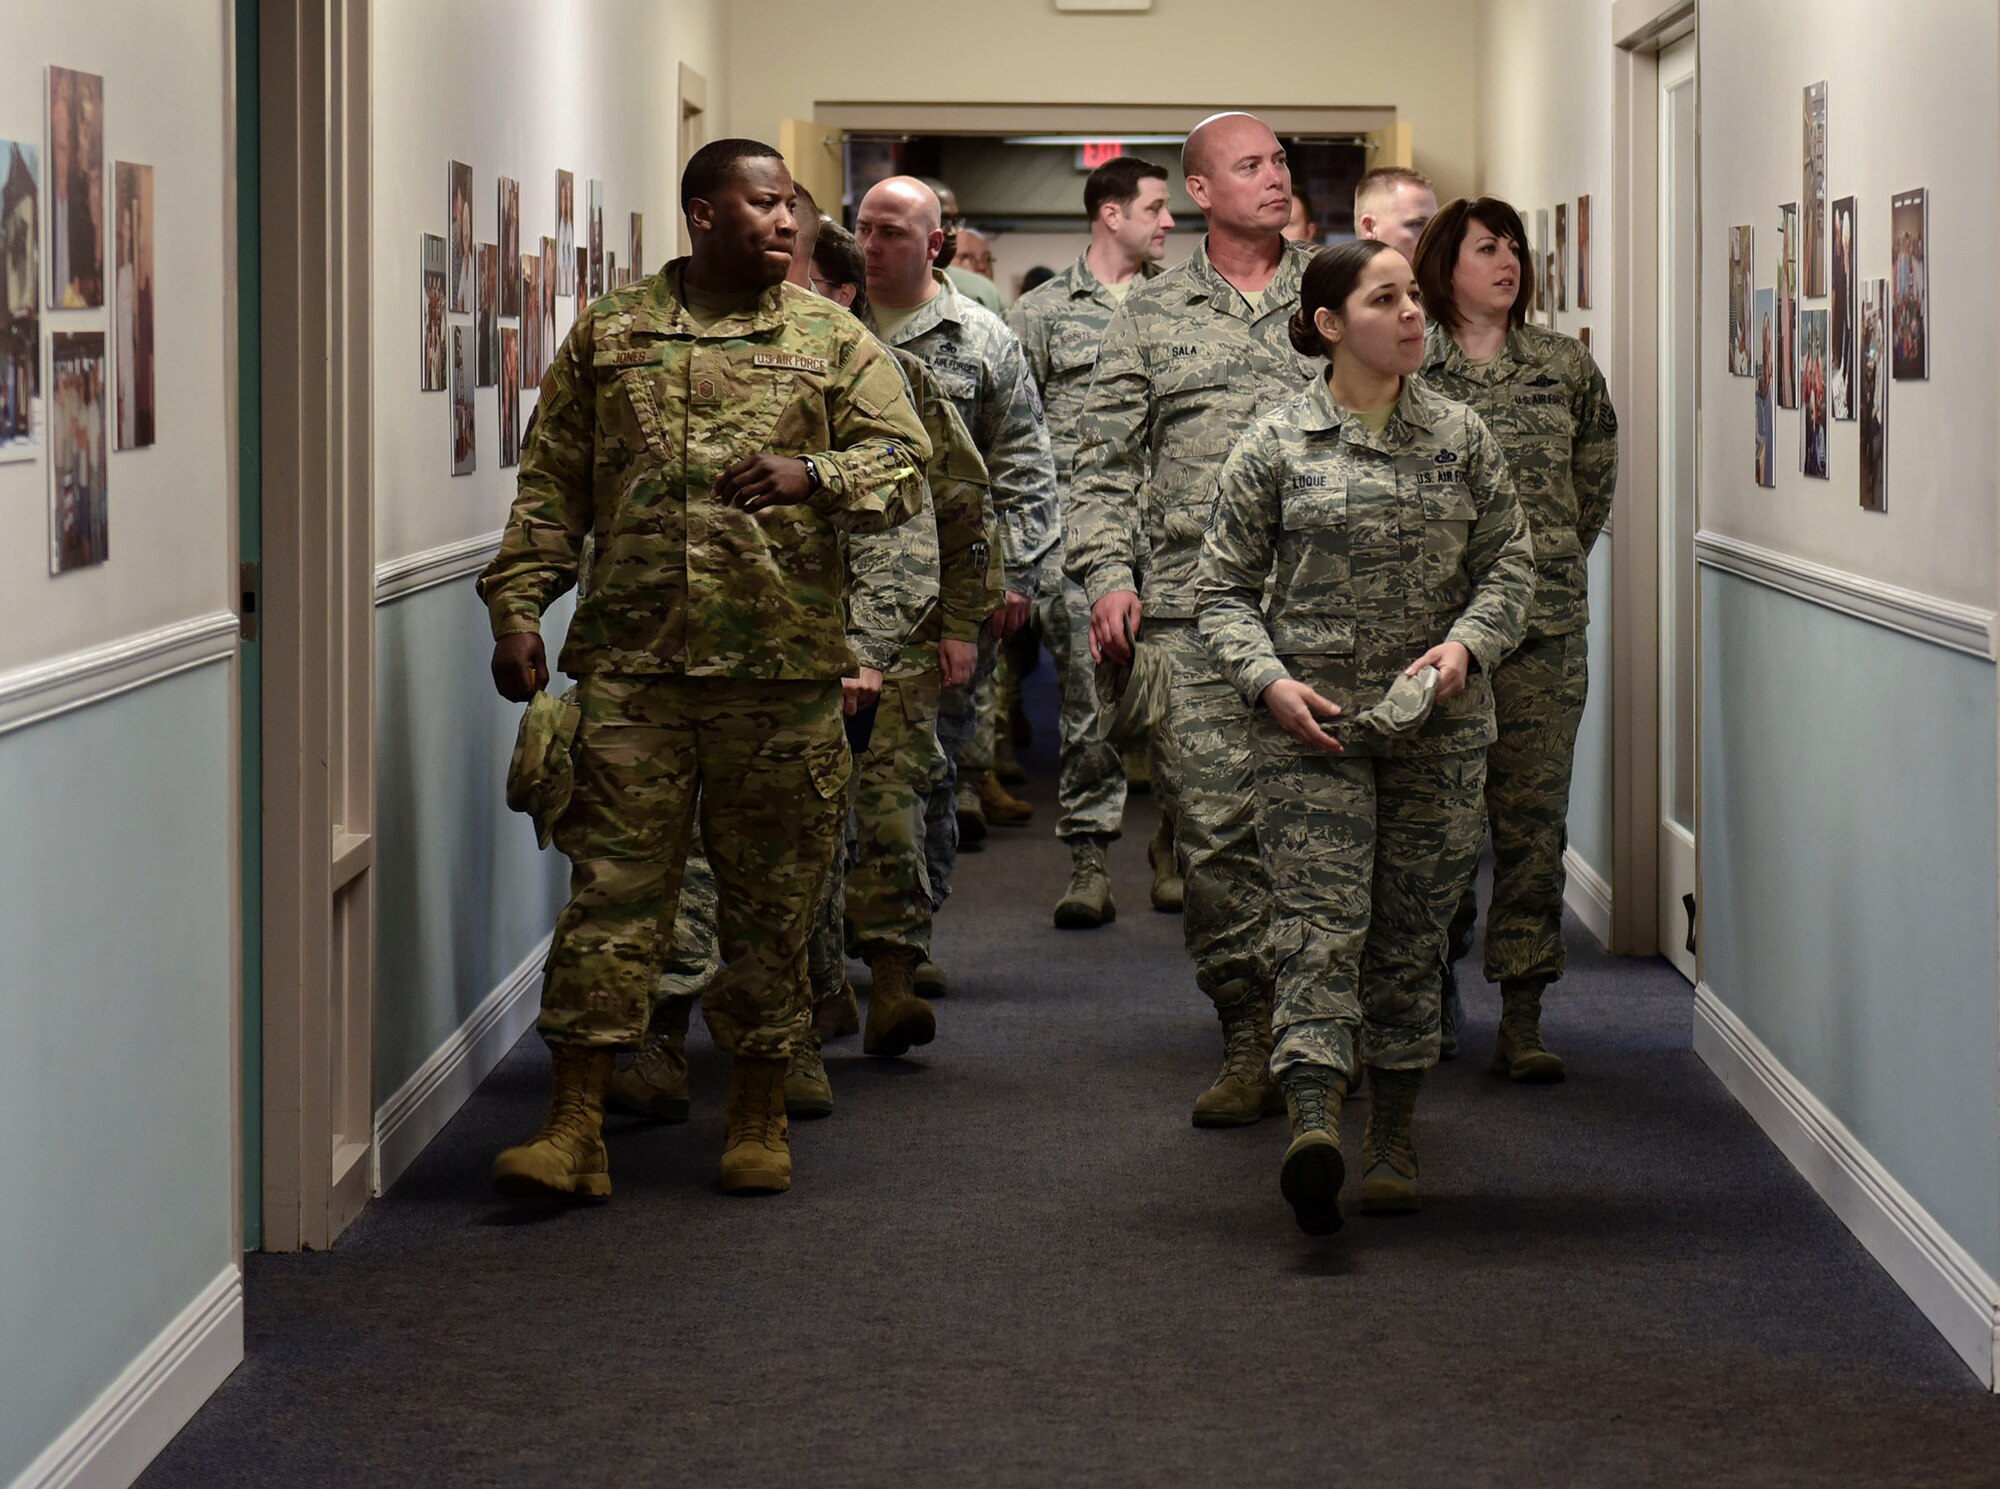 Airmen tour a facility at the Air Force Enlisted Village as part of the installation’s first Superintendent Symposium Jan. 27 at Eglin Air Force Base, Fla. The nearly week-long course was established to fulfill a gap in training for superintendents. Students learned about their daily roles, how to support of the overall health of their squadron and prepare for the unexpected. The curriculum also included briefings by subject matter experts on deployment and medical readiness, manpower, budget, assignments, inspector general applications, and personnel. (U.S. Air Force Photo/Jasmine Porterfield)